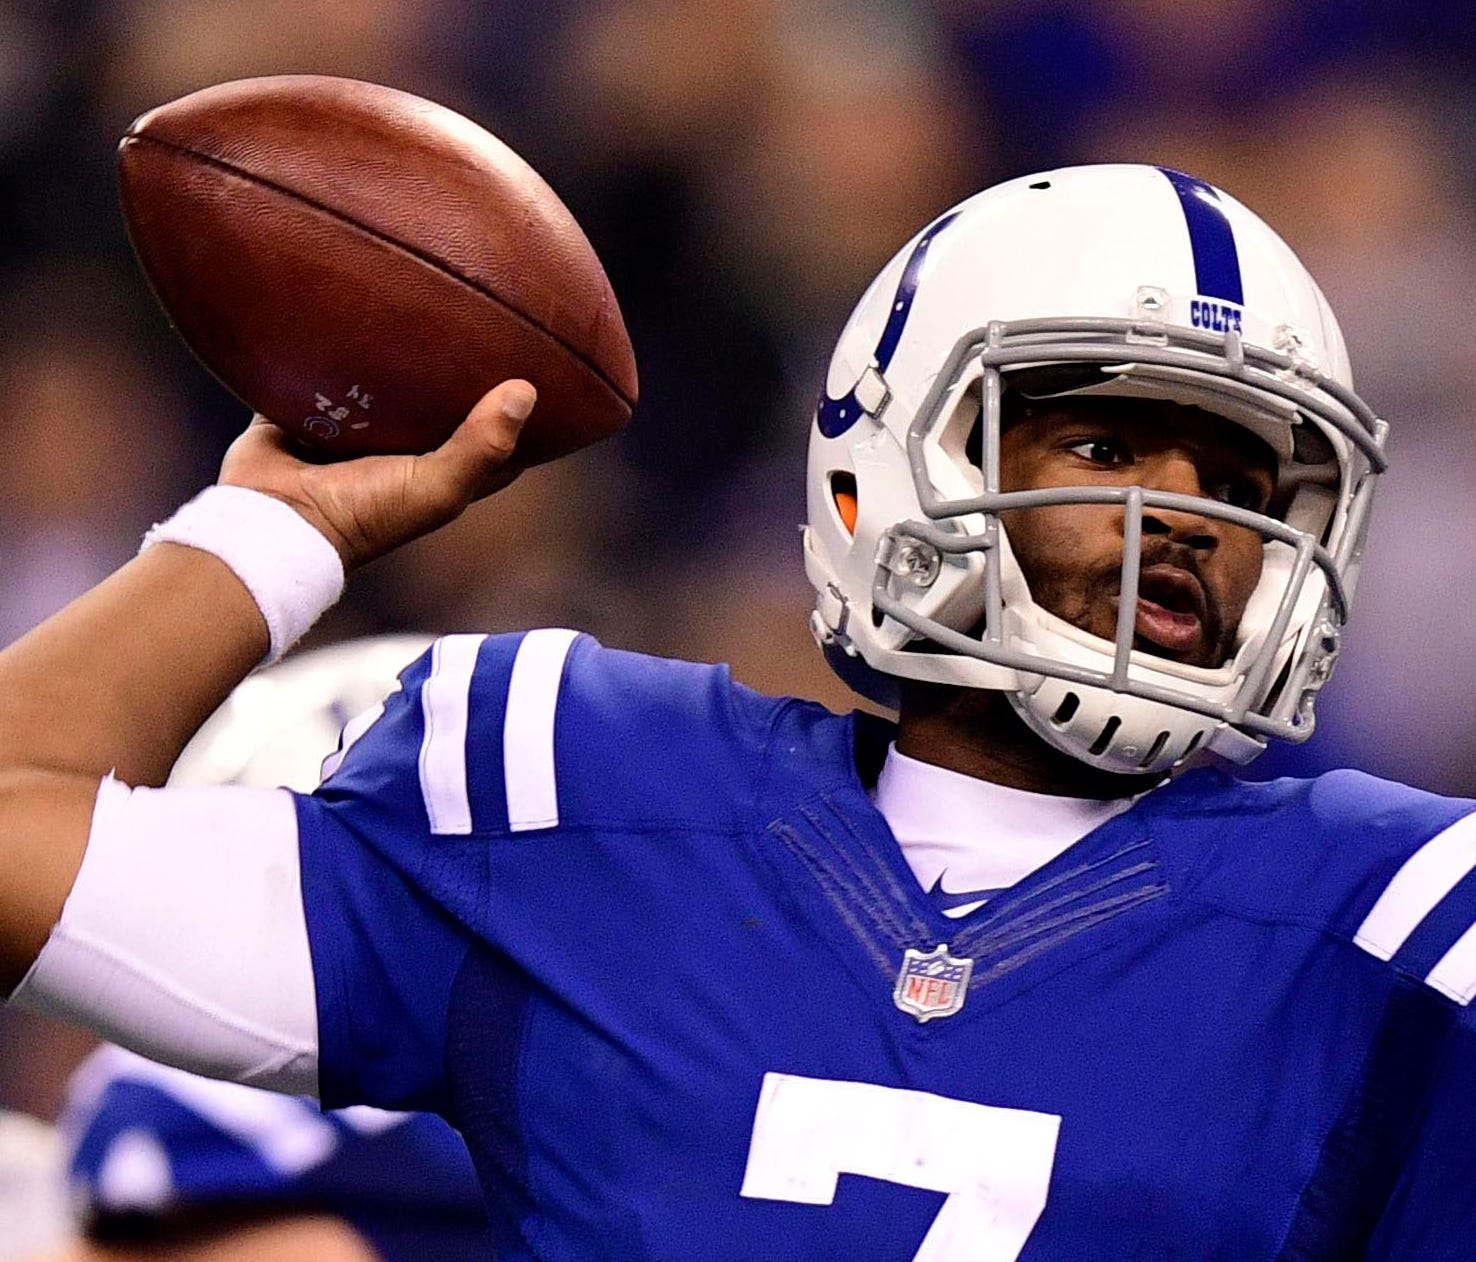 Indianapolis Colts quarterback Jacoby Brissett was allowed to return to the game after taking a hard helmet-to-helmet hit in the third quarter.